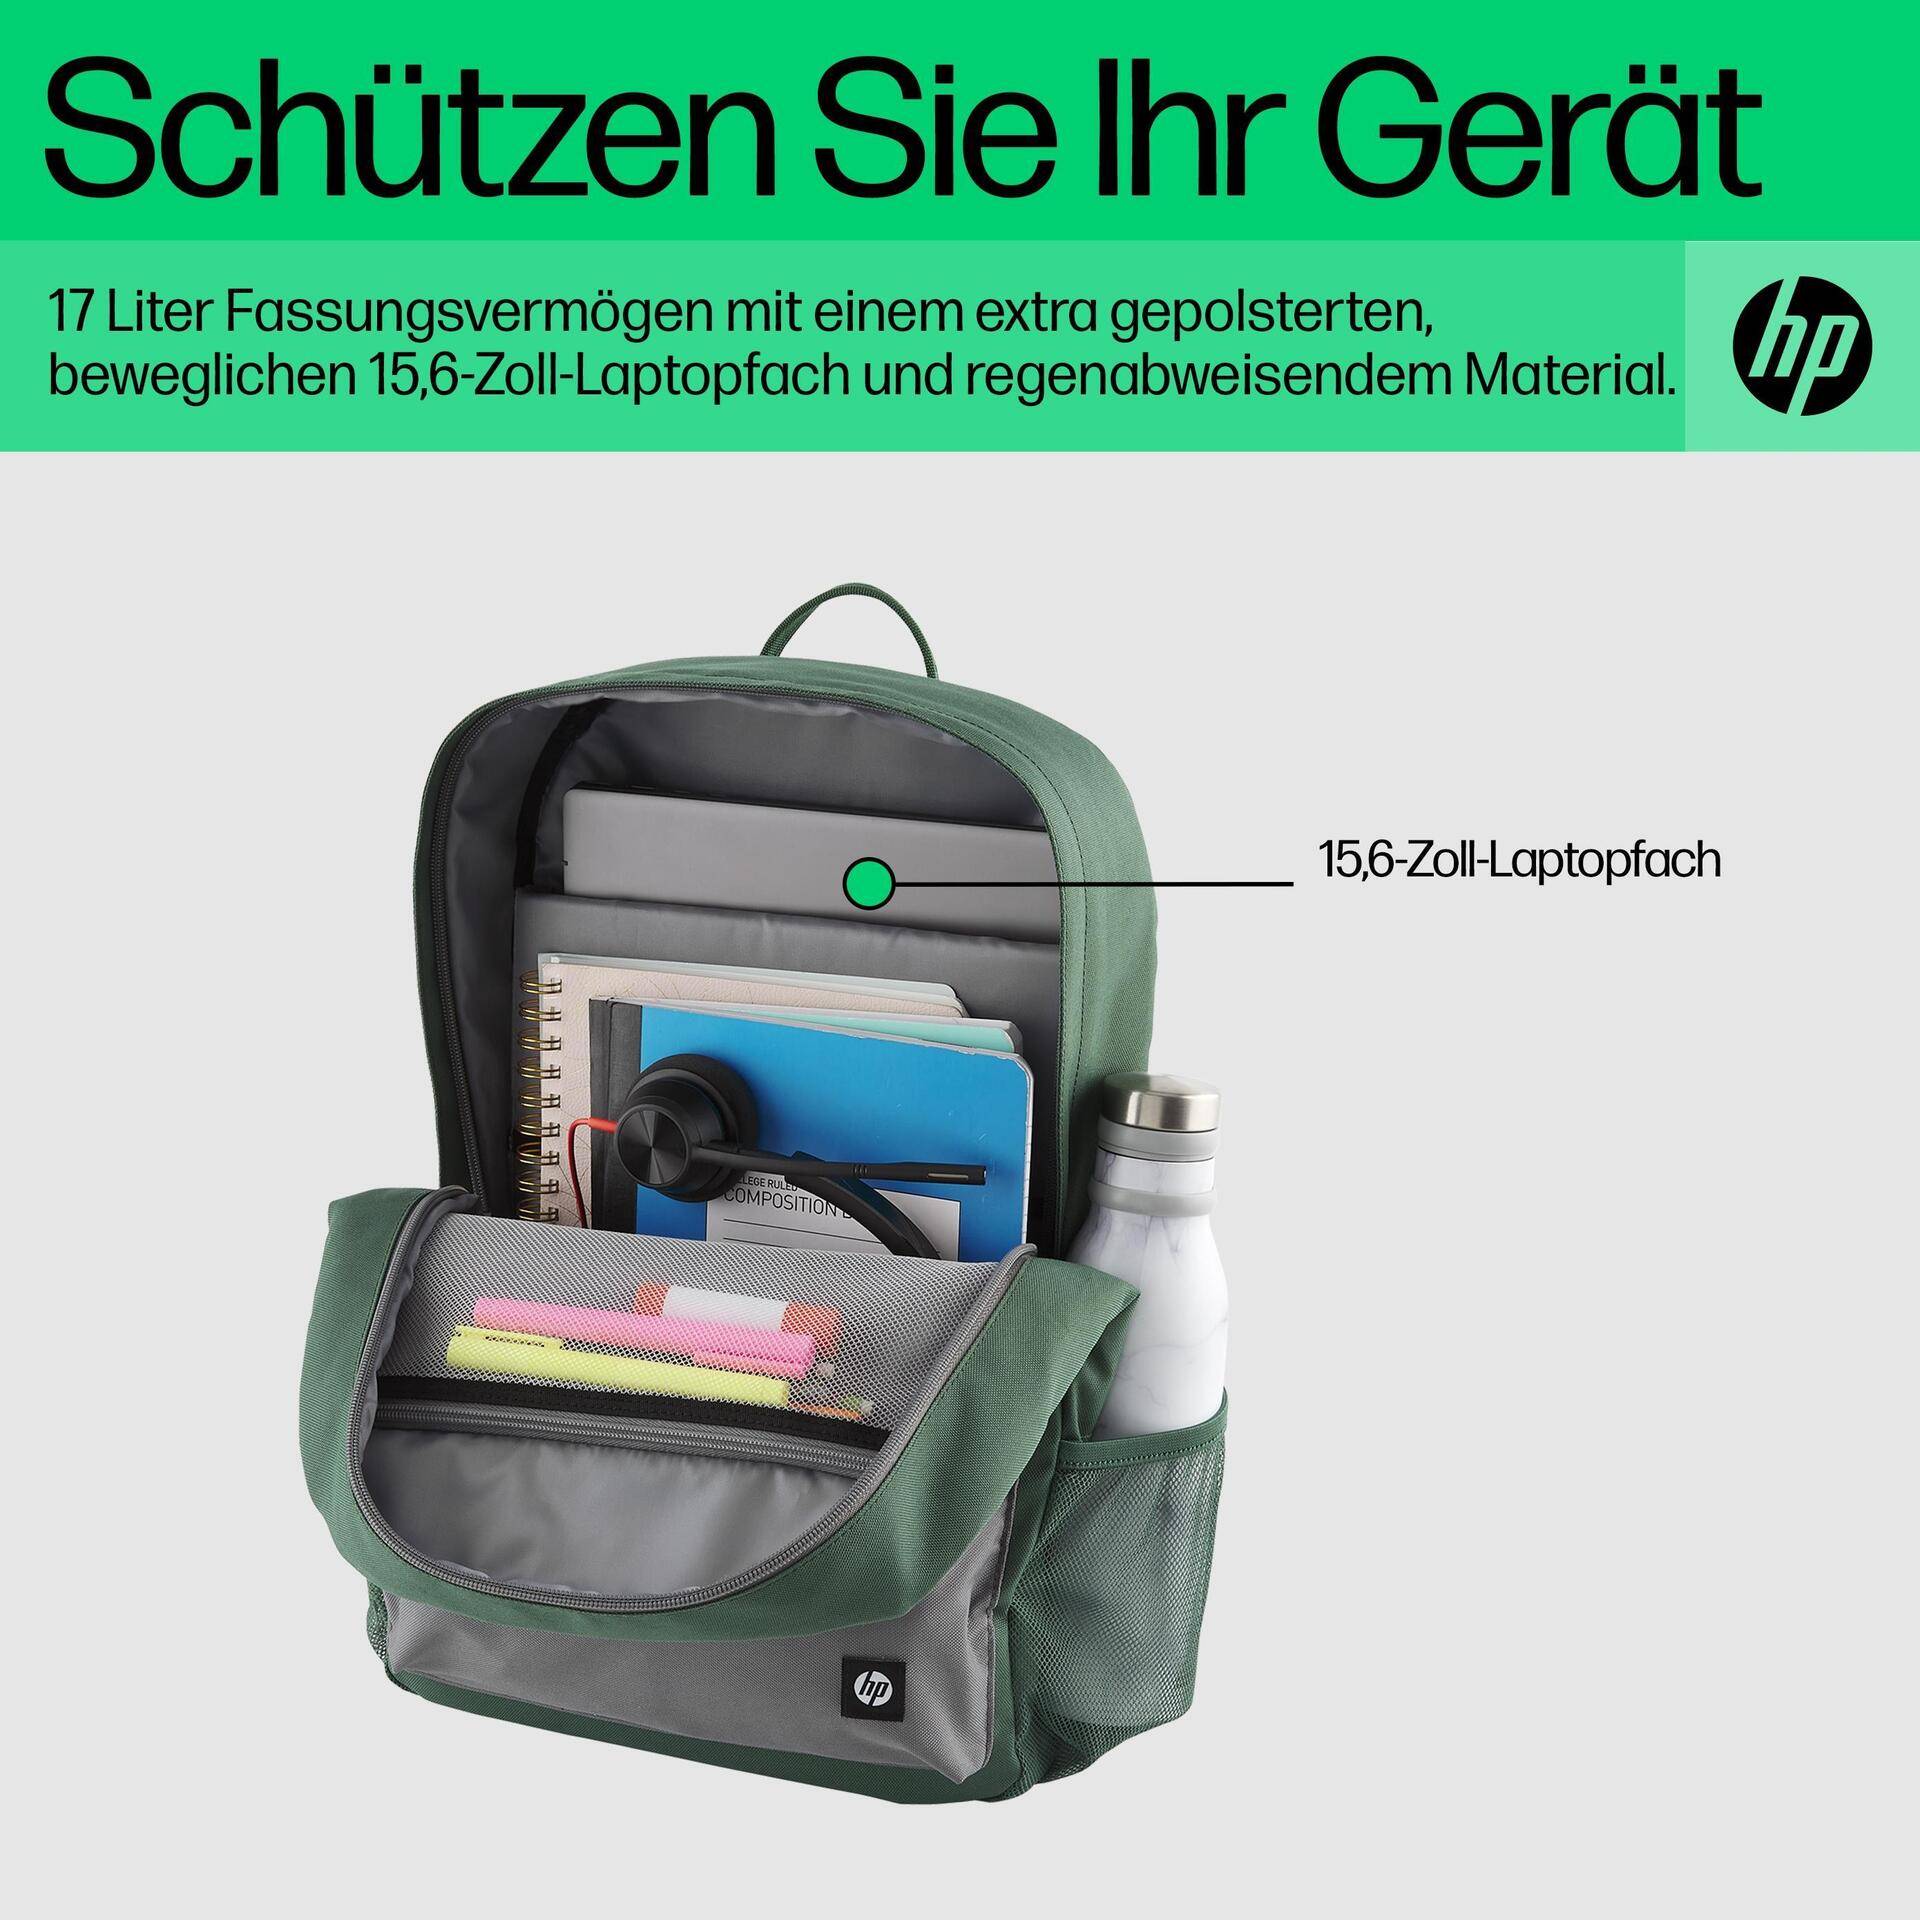 HP Campus Rucksack (grün) - 50% post-consumer recycled plastic, LDPE bag contains 100% recycled plastic, Hanger tag is made... - 295 mm - 185 mm - 435 mm - 490 g - 295 mm (7J595AA) von HP Inc